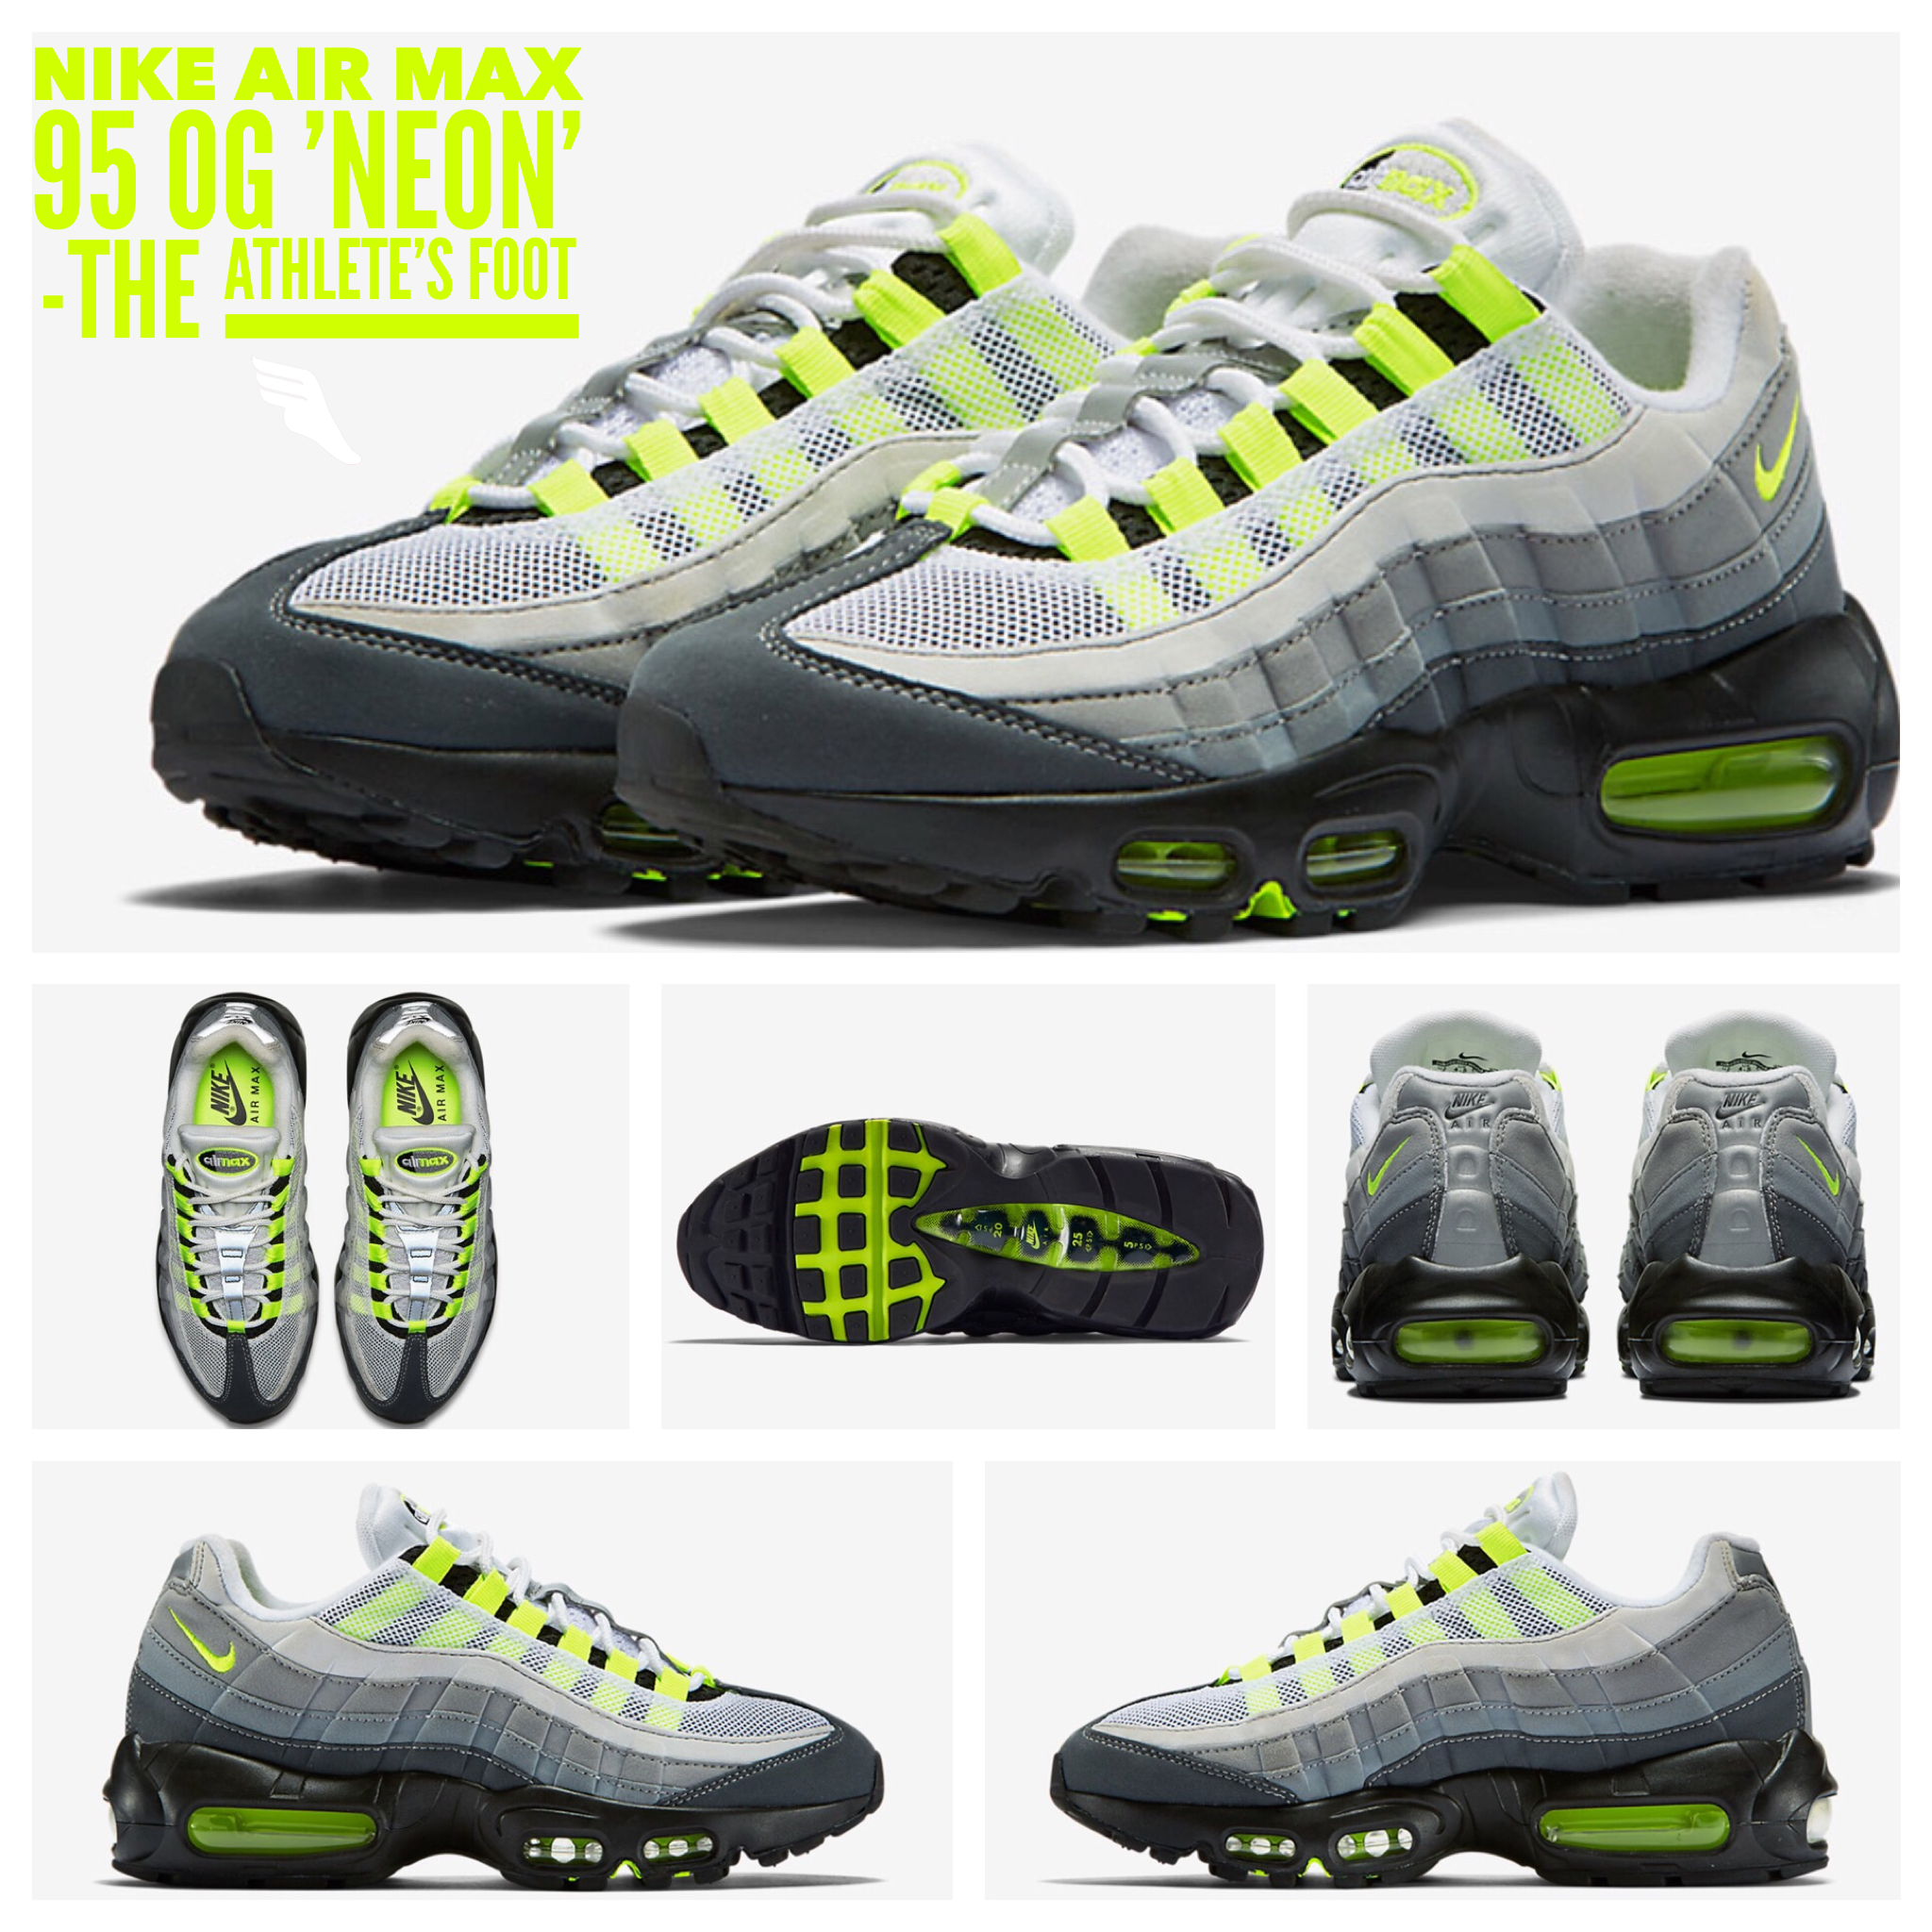 Nike Air Max 95 Neon l The Athlete's Foot